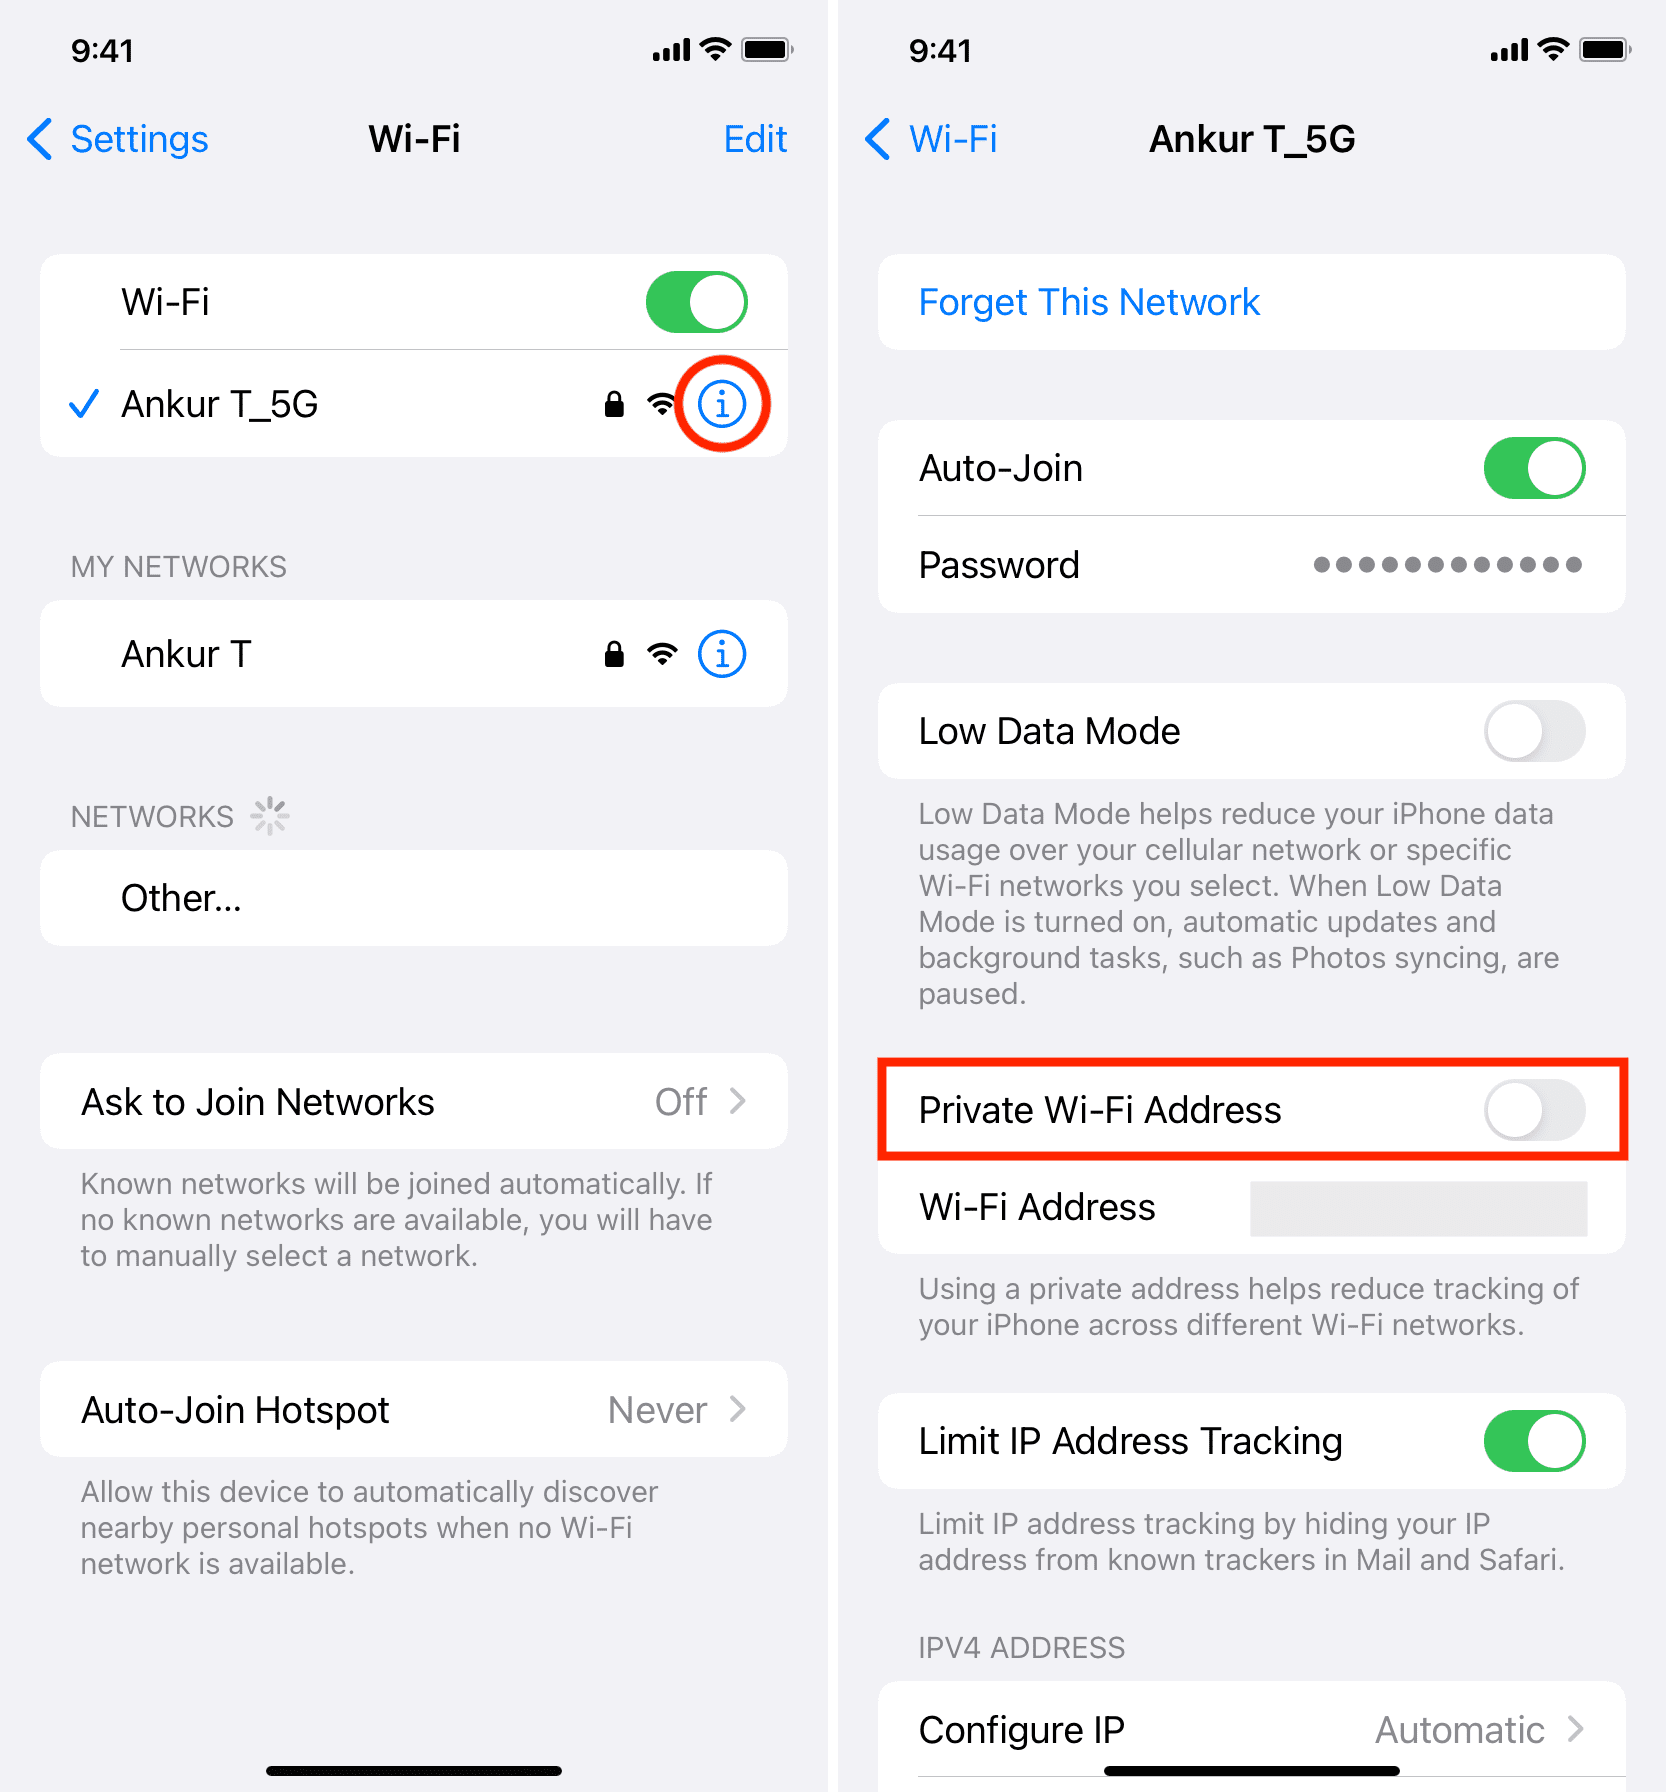 Turn off Private Wi-Fi Address on iPhone to fix VPN problems